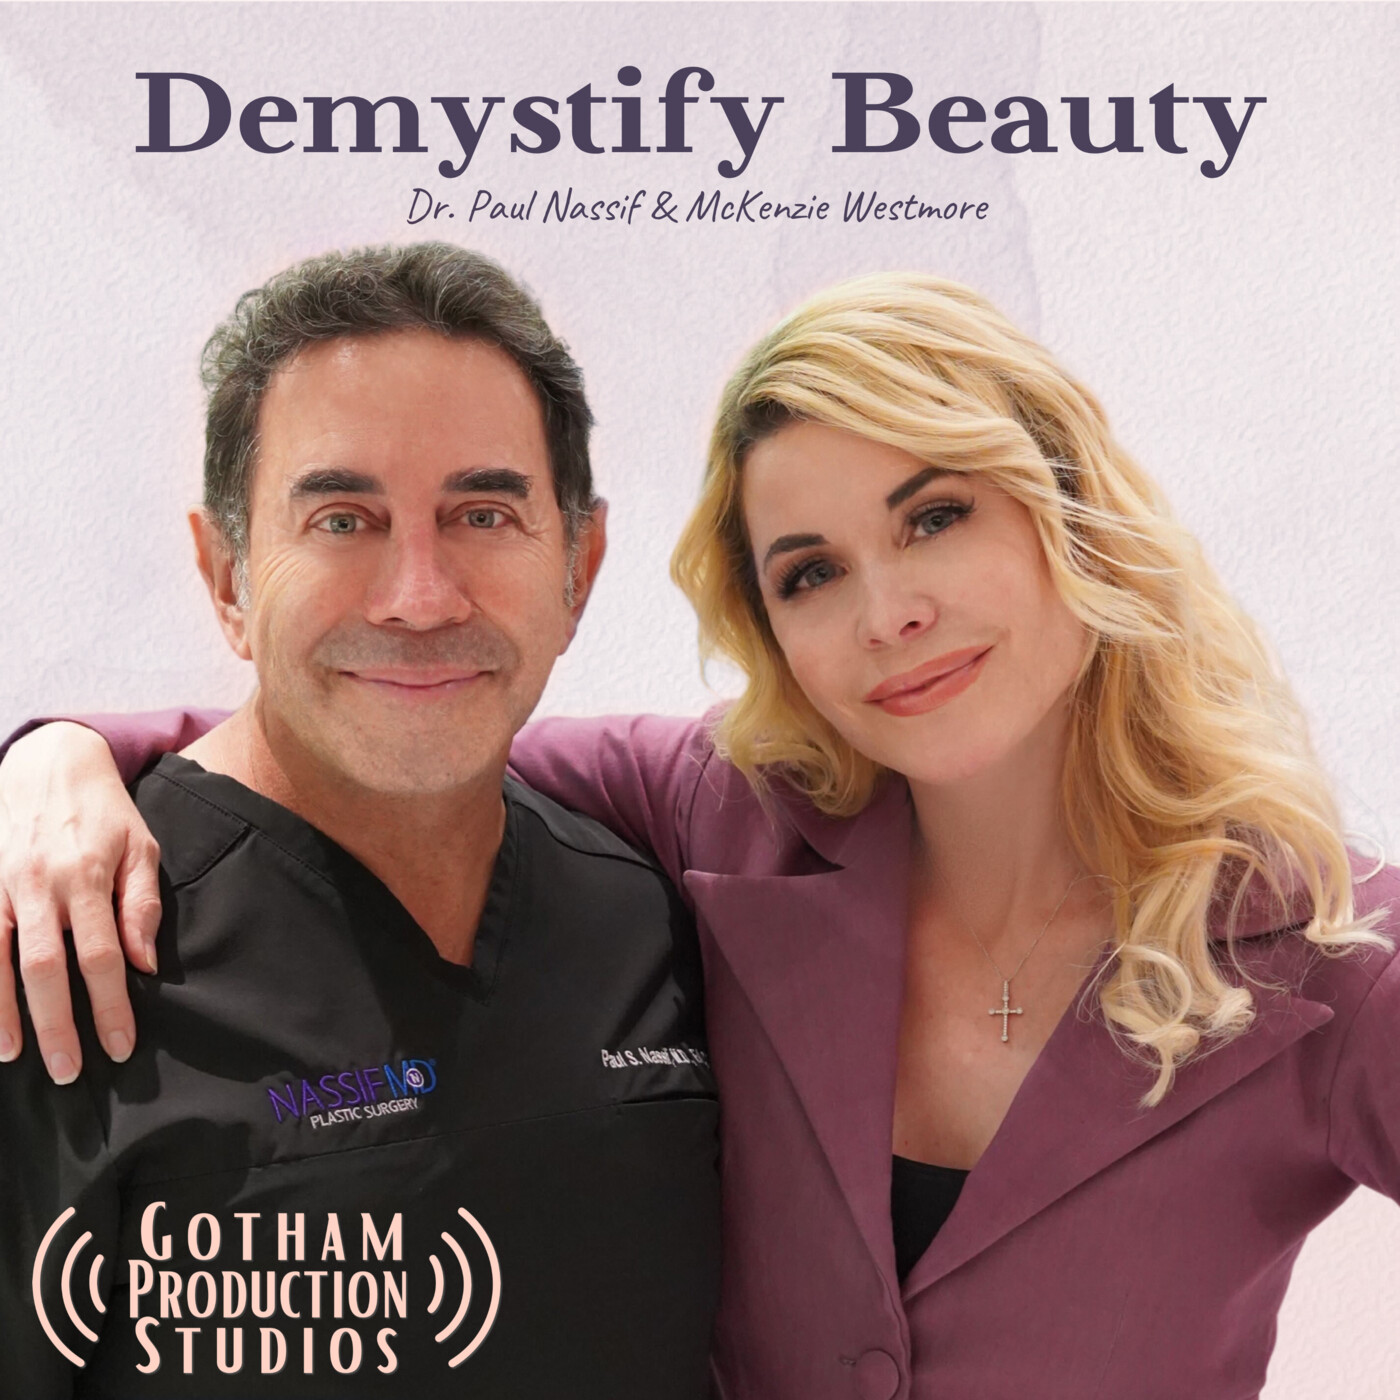 Demystify Beauty with McKenzie Westmore and Dr. Paul Nassif